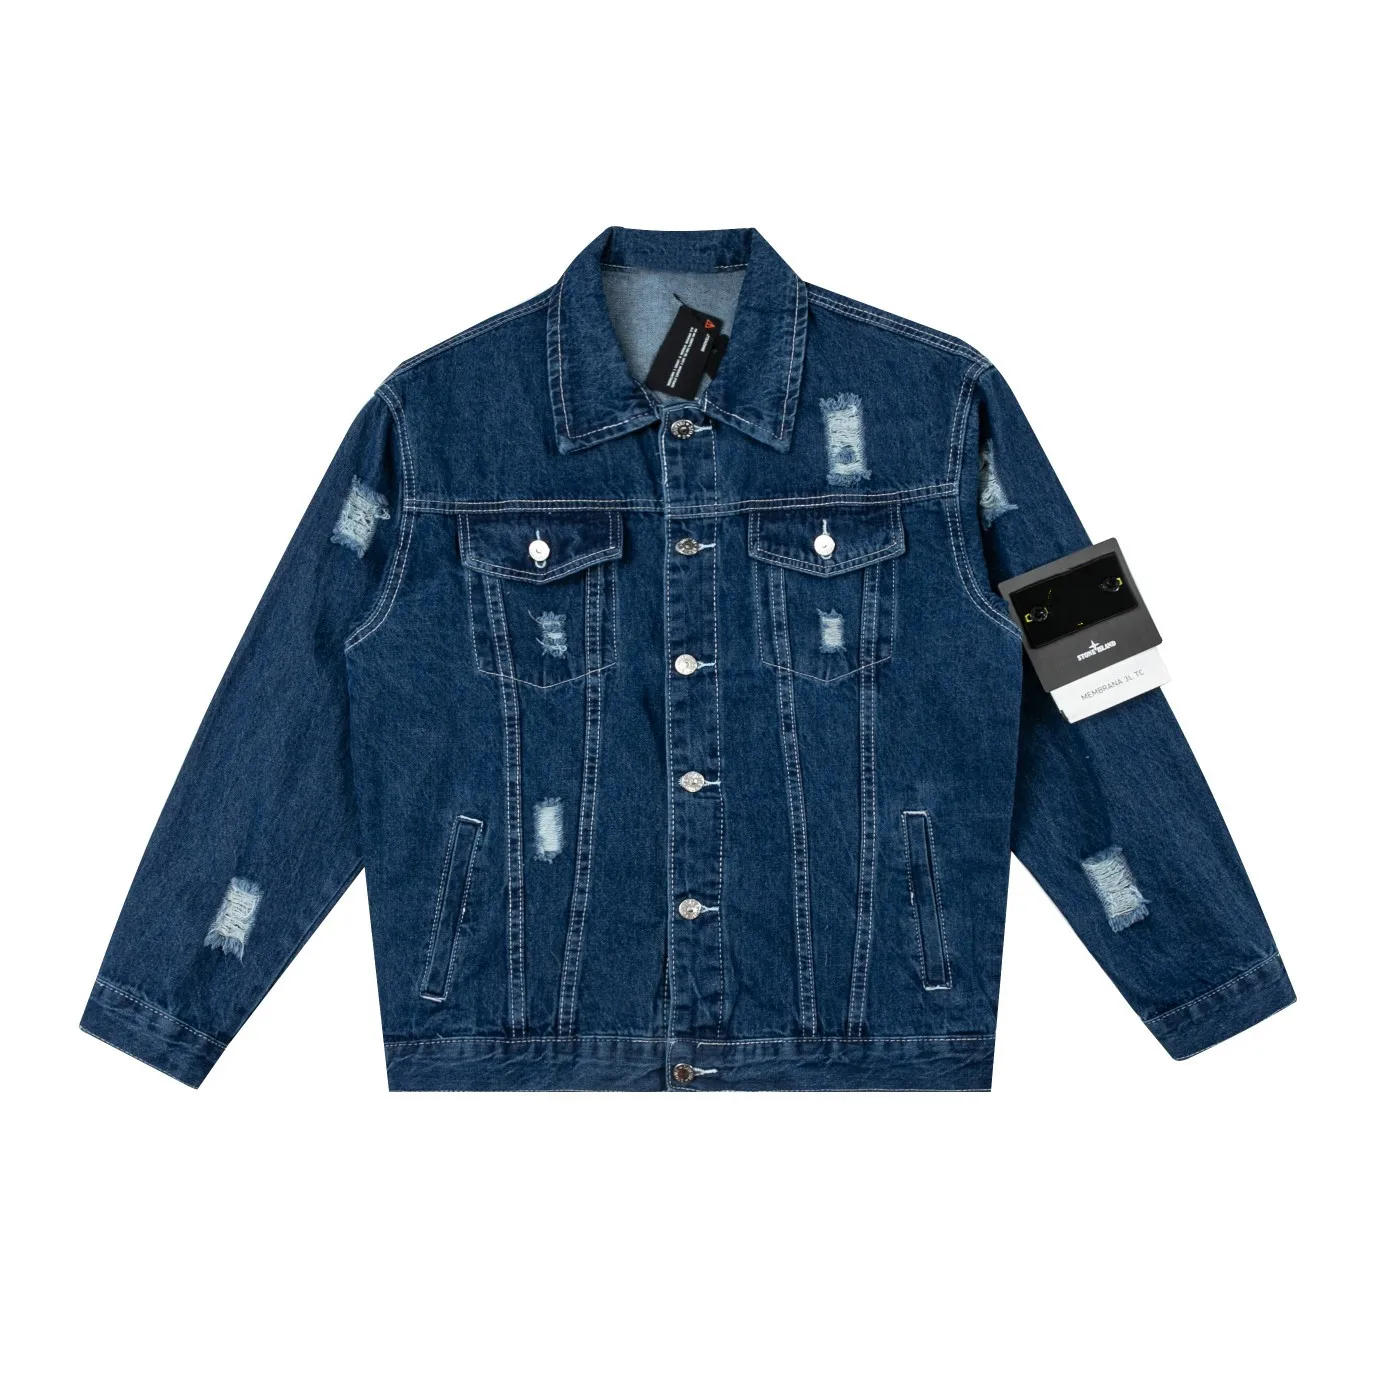 

22ss New High Quality 1:1 Classic Compass Armband Embroidered Washed Distressed Frayed Ripped Men's Denim Jacket Men Women Coat